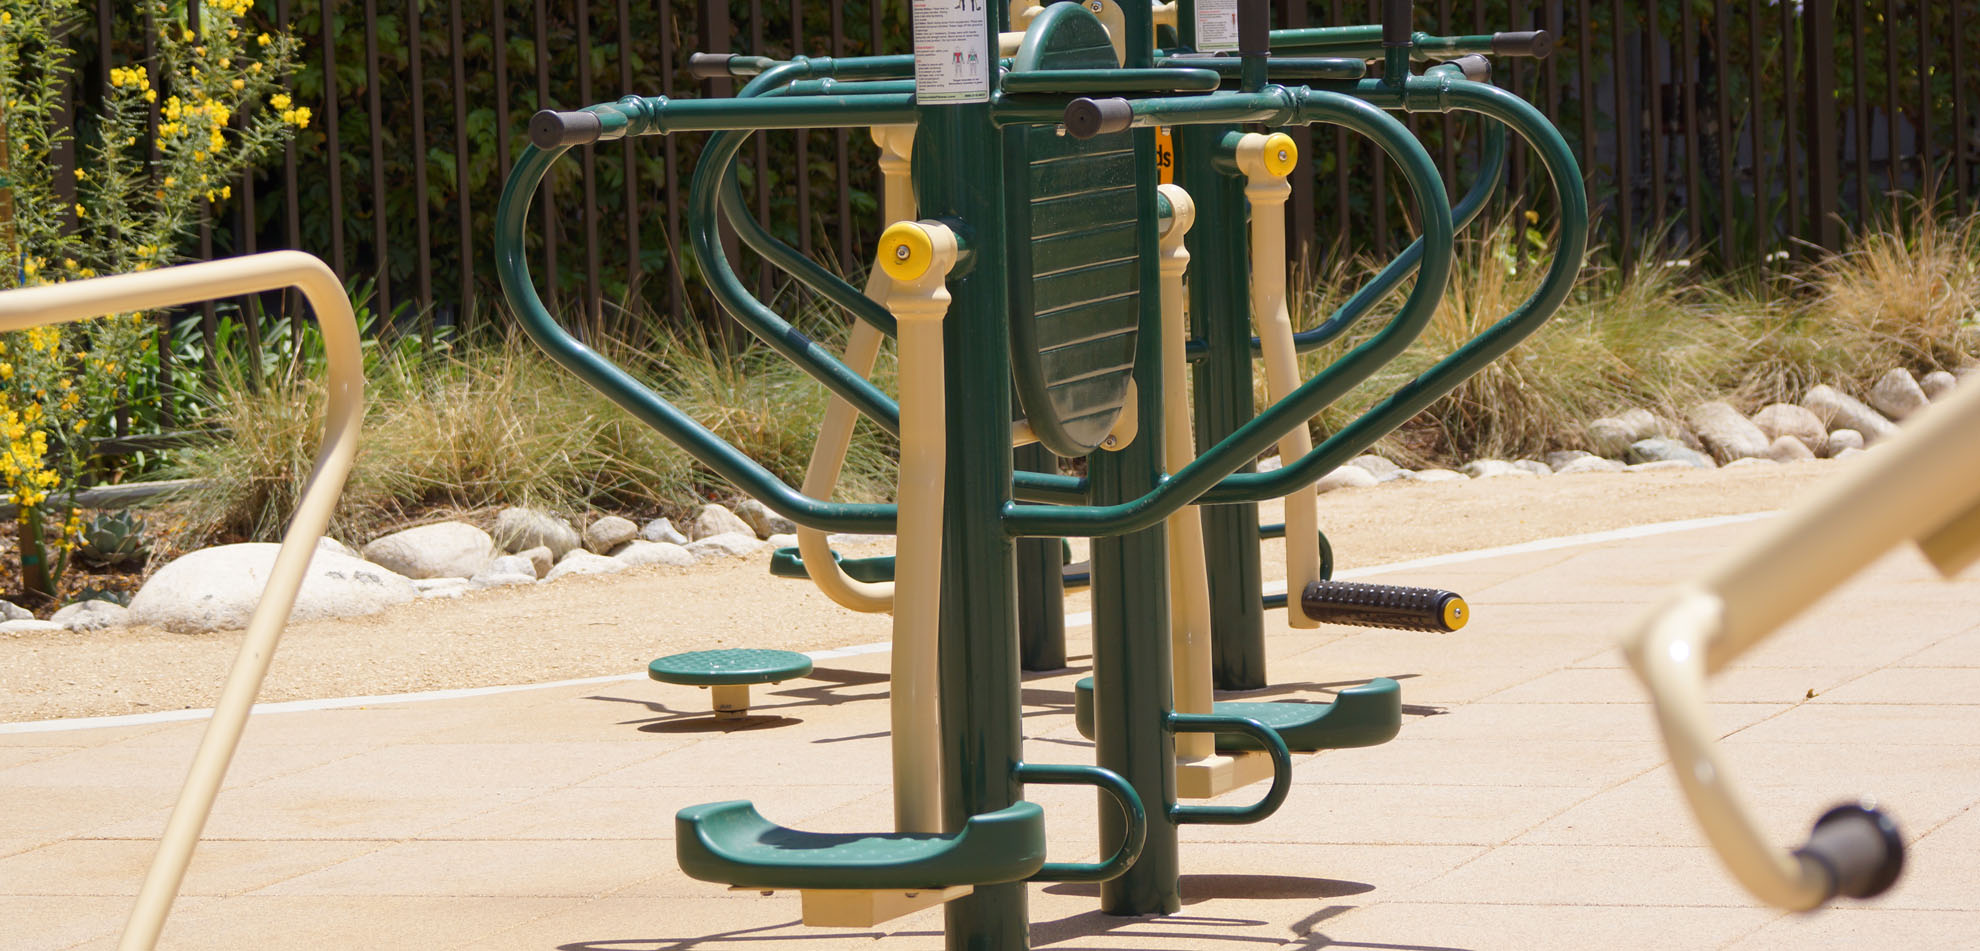 Outdoor exercise equipment at Garfield Exercise Park - City of